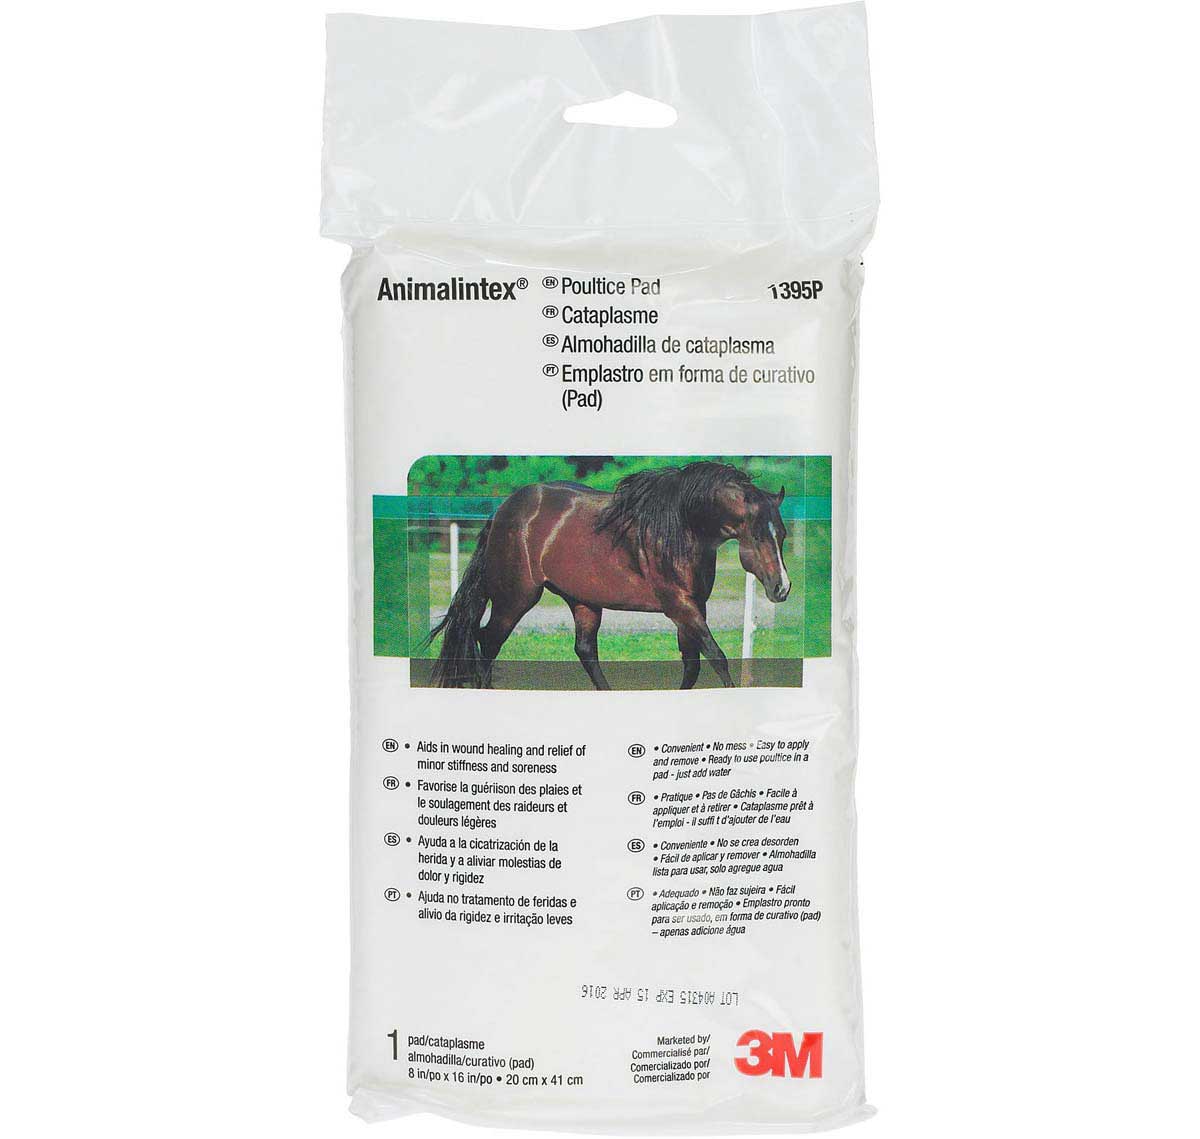 Animalintex Poultice Pad in Sheets or Hoof Size Pads